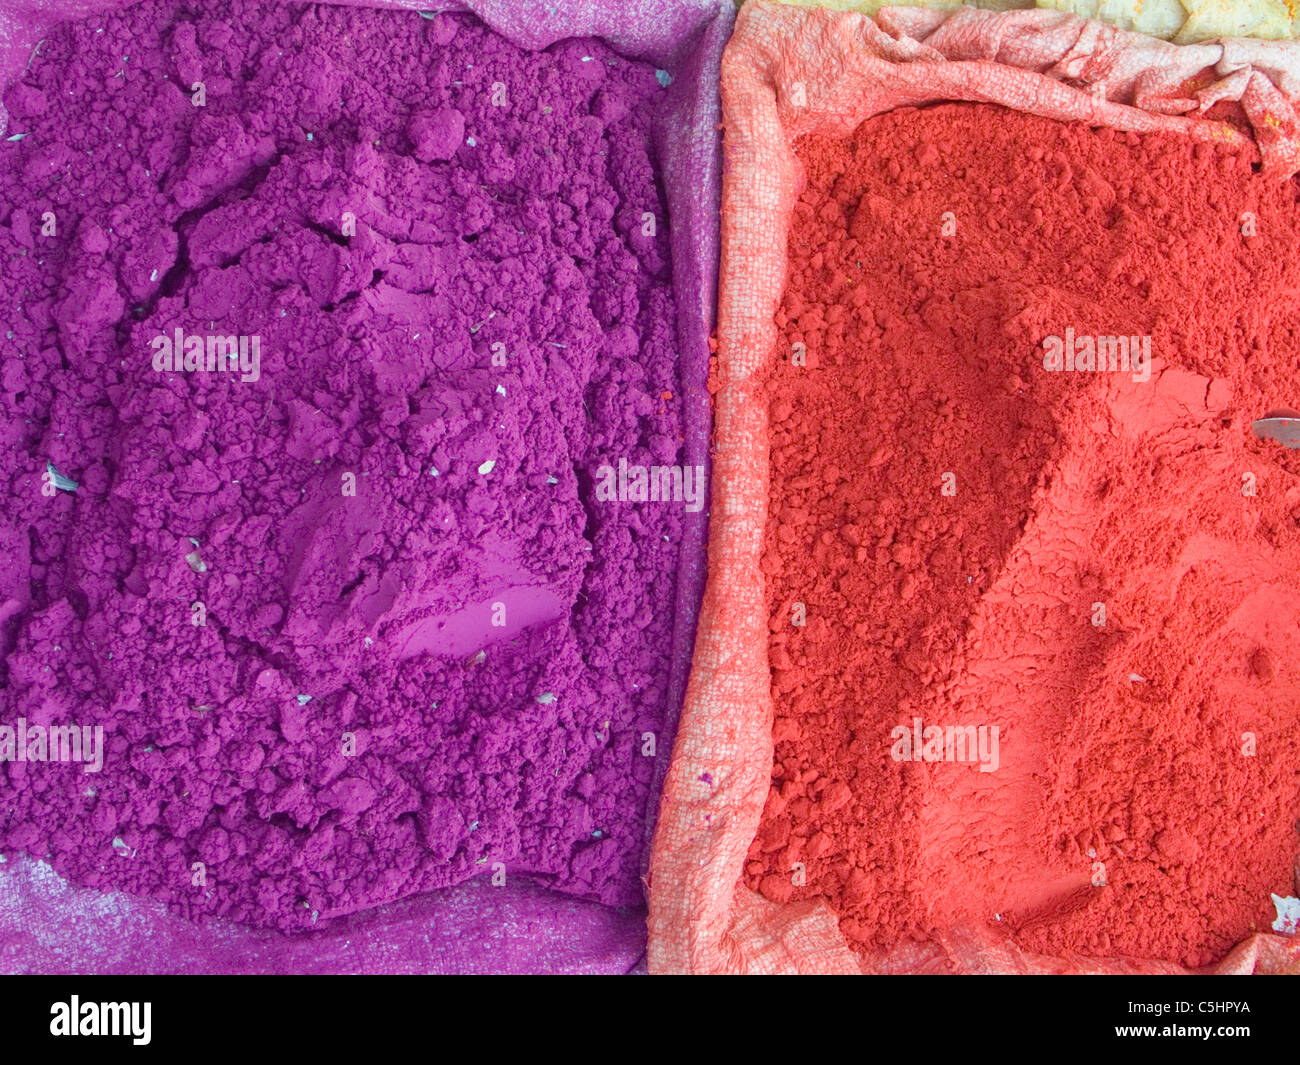 Colored powder used in religious rituals for sale ina market in Bangalore, India Stock Photo